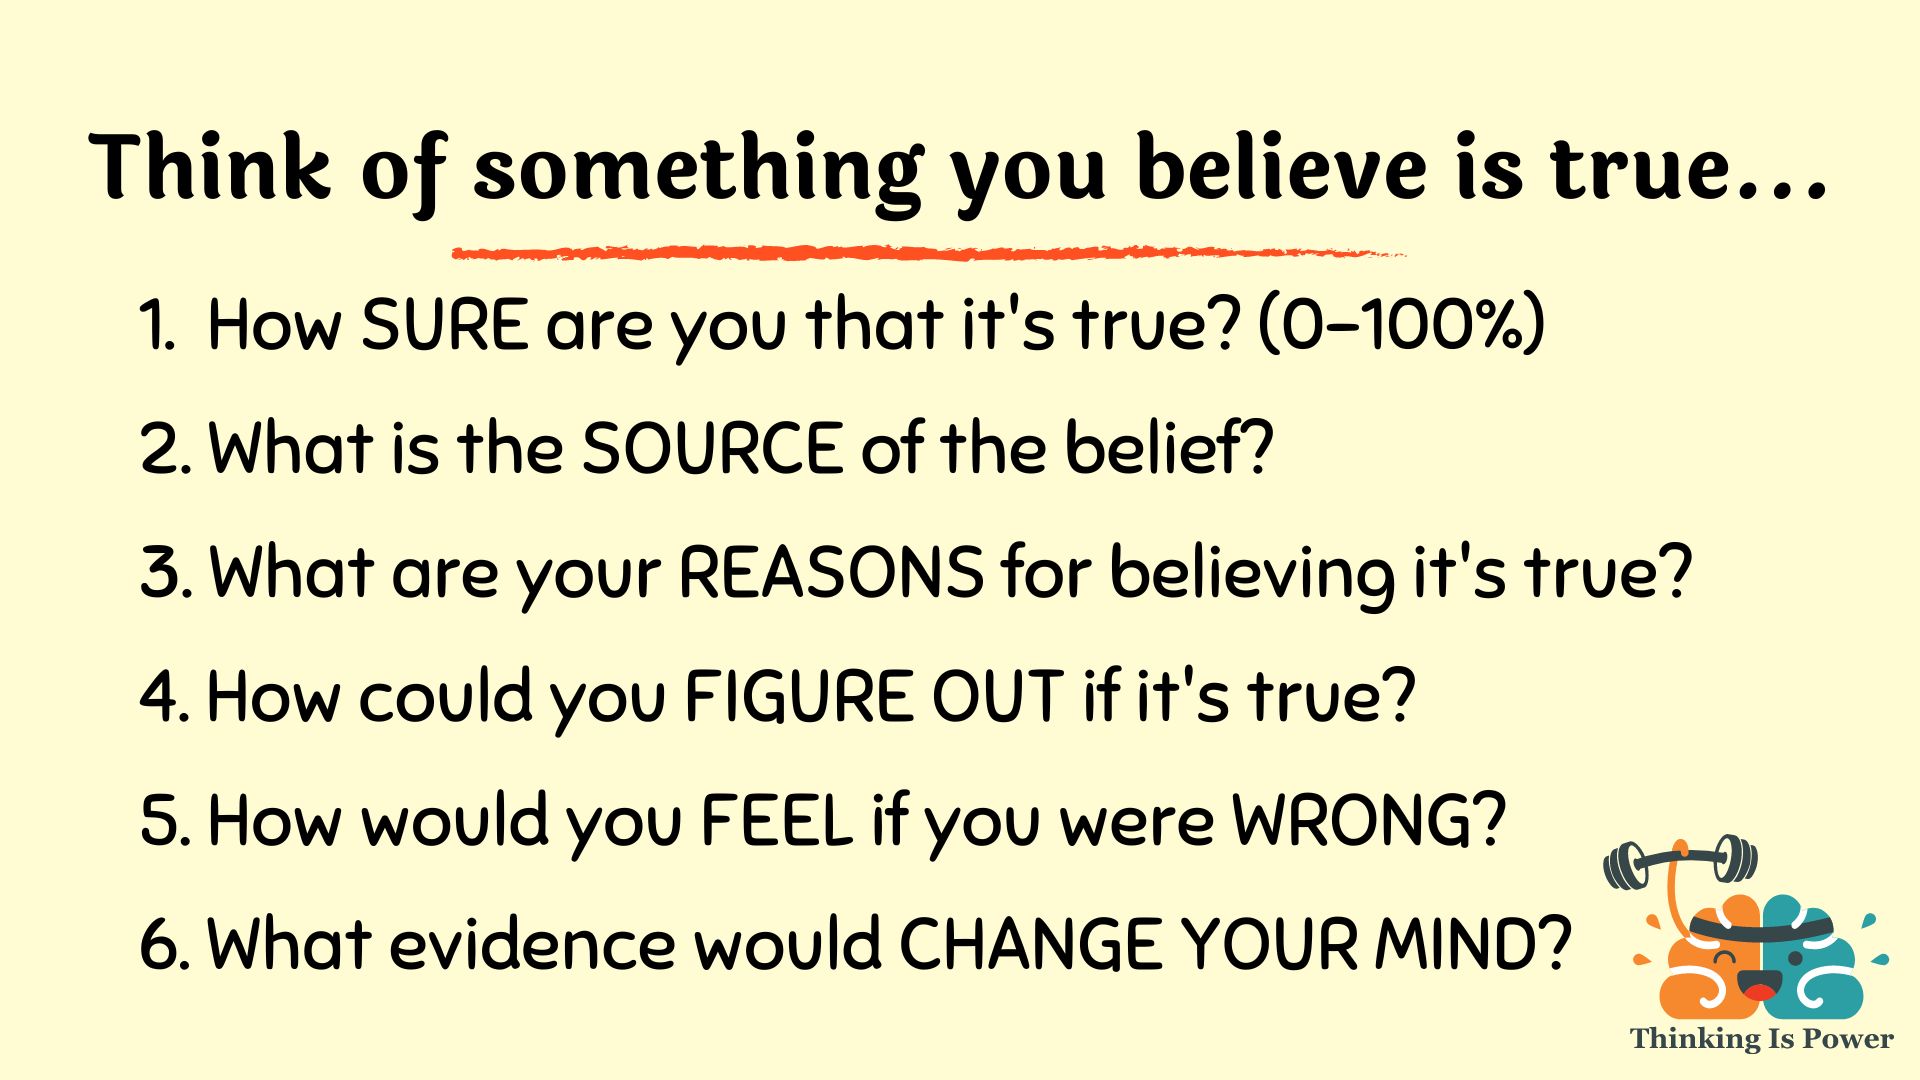 Think of something you believe is true and ask these six questions: How sure are you that the belief is true? What is the source of the belief? What are your reasons for believing it's true? How could you figure out if it's true? How would you feel if you were wrong? What evidence would change your mind?